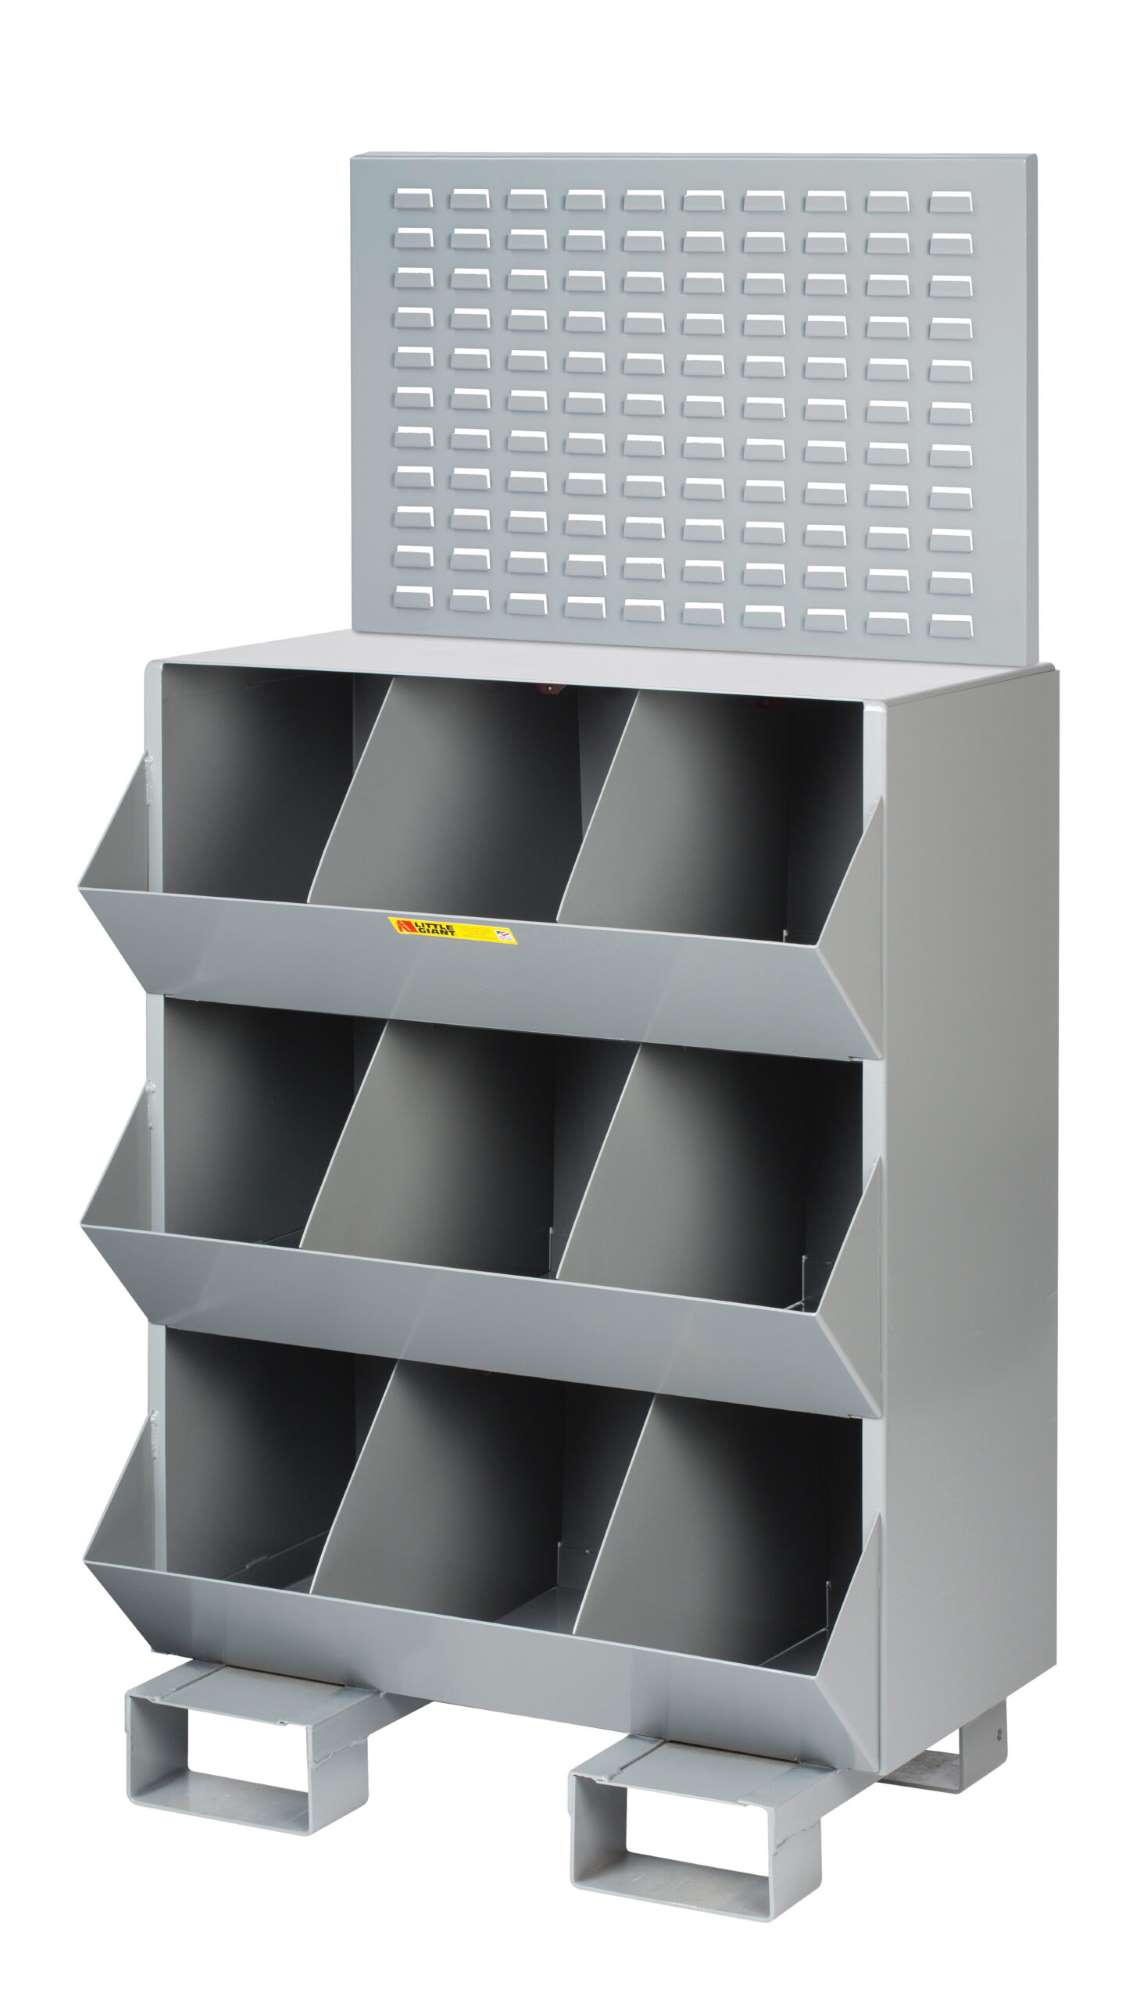 Little Giant storage bins with Louvered Panel, small parts storage bins, Welded Steel storage bins, 9 compartment storage bins, Forkliftable, includes Louvered panels for hanging plastic bins